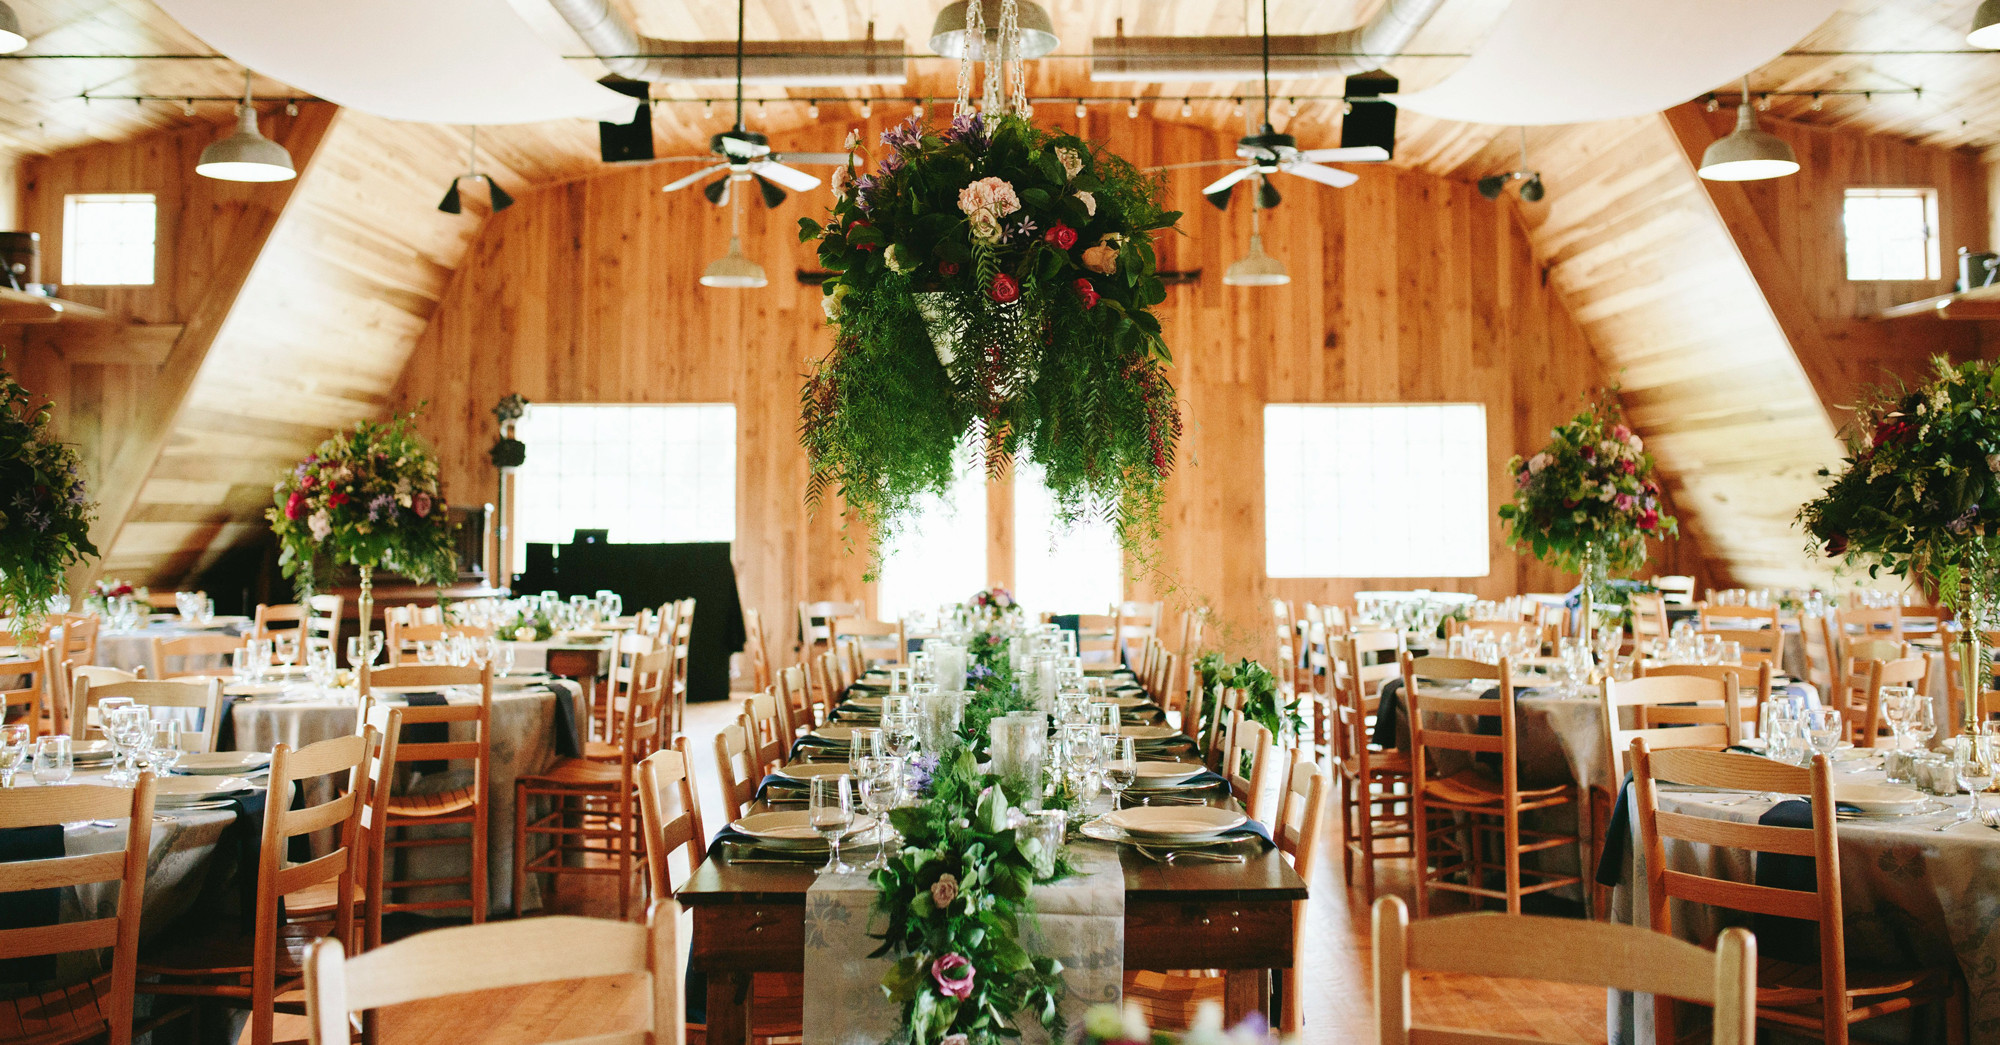 How To Decorate For A Wedding Reception
 20 Easy Wedding Decoration Ideas for Your Reception